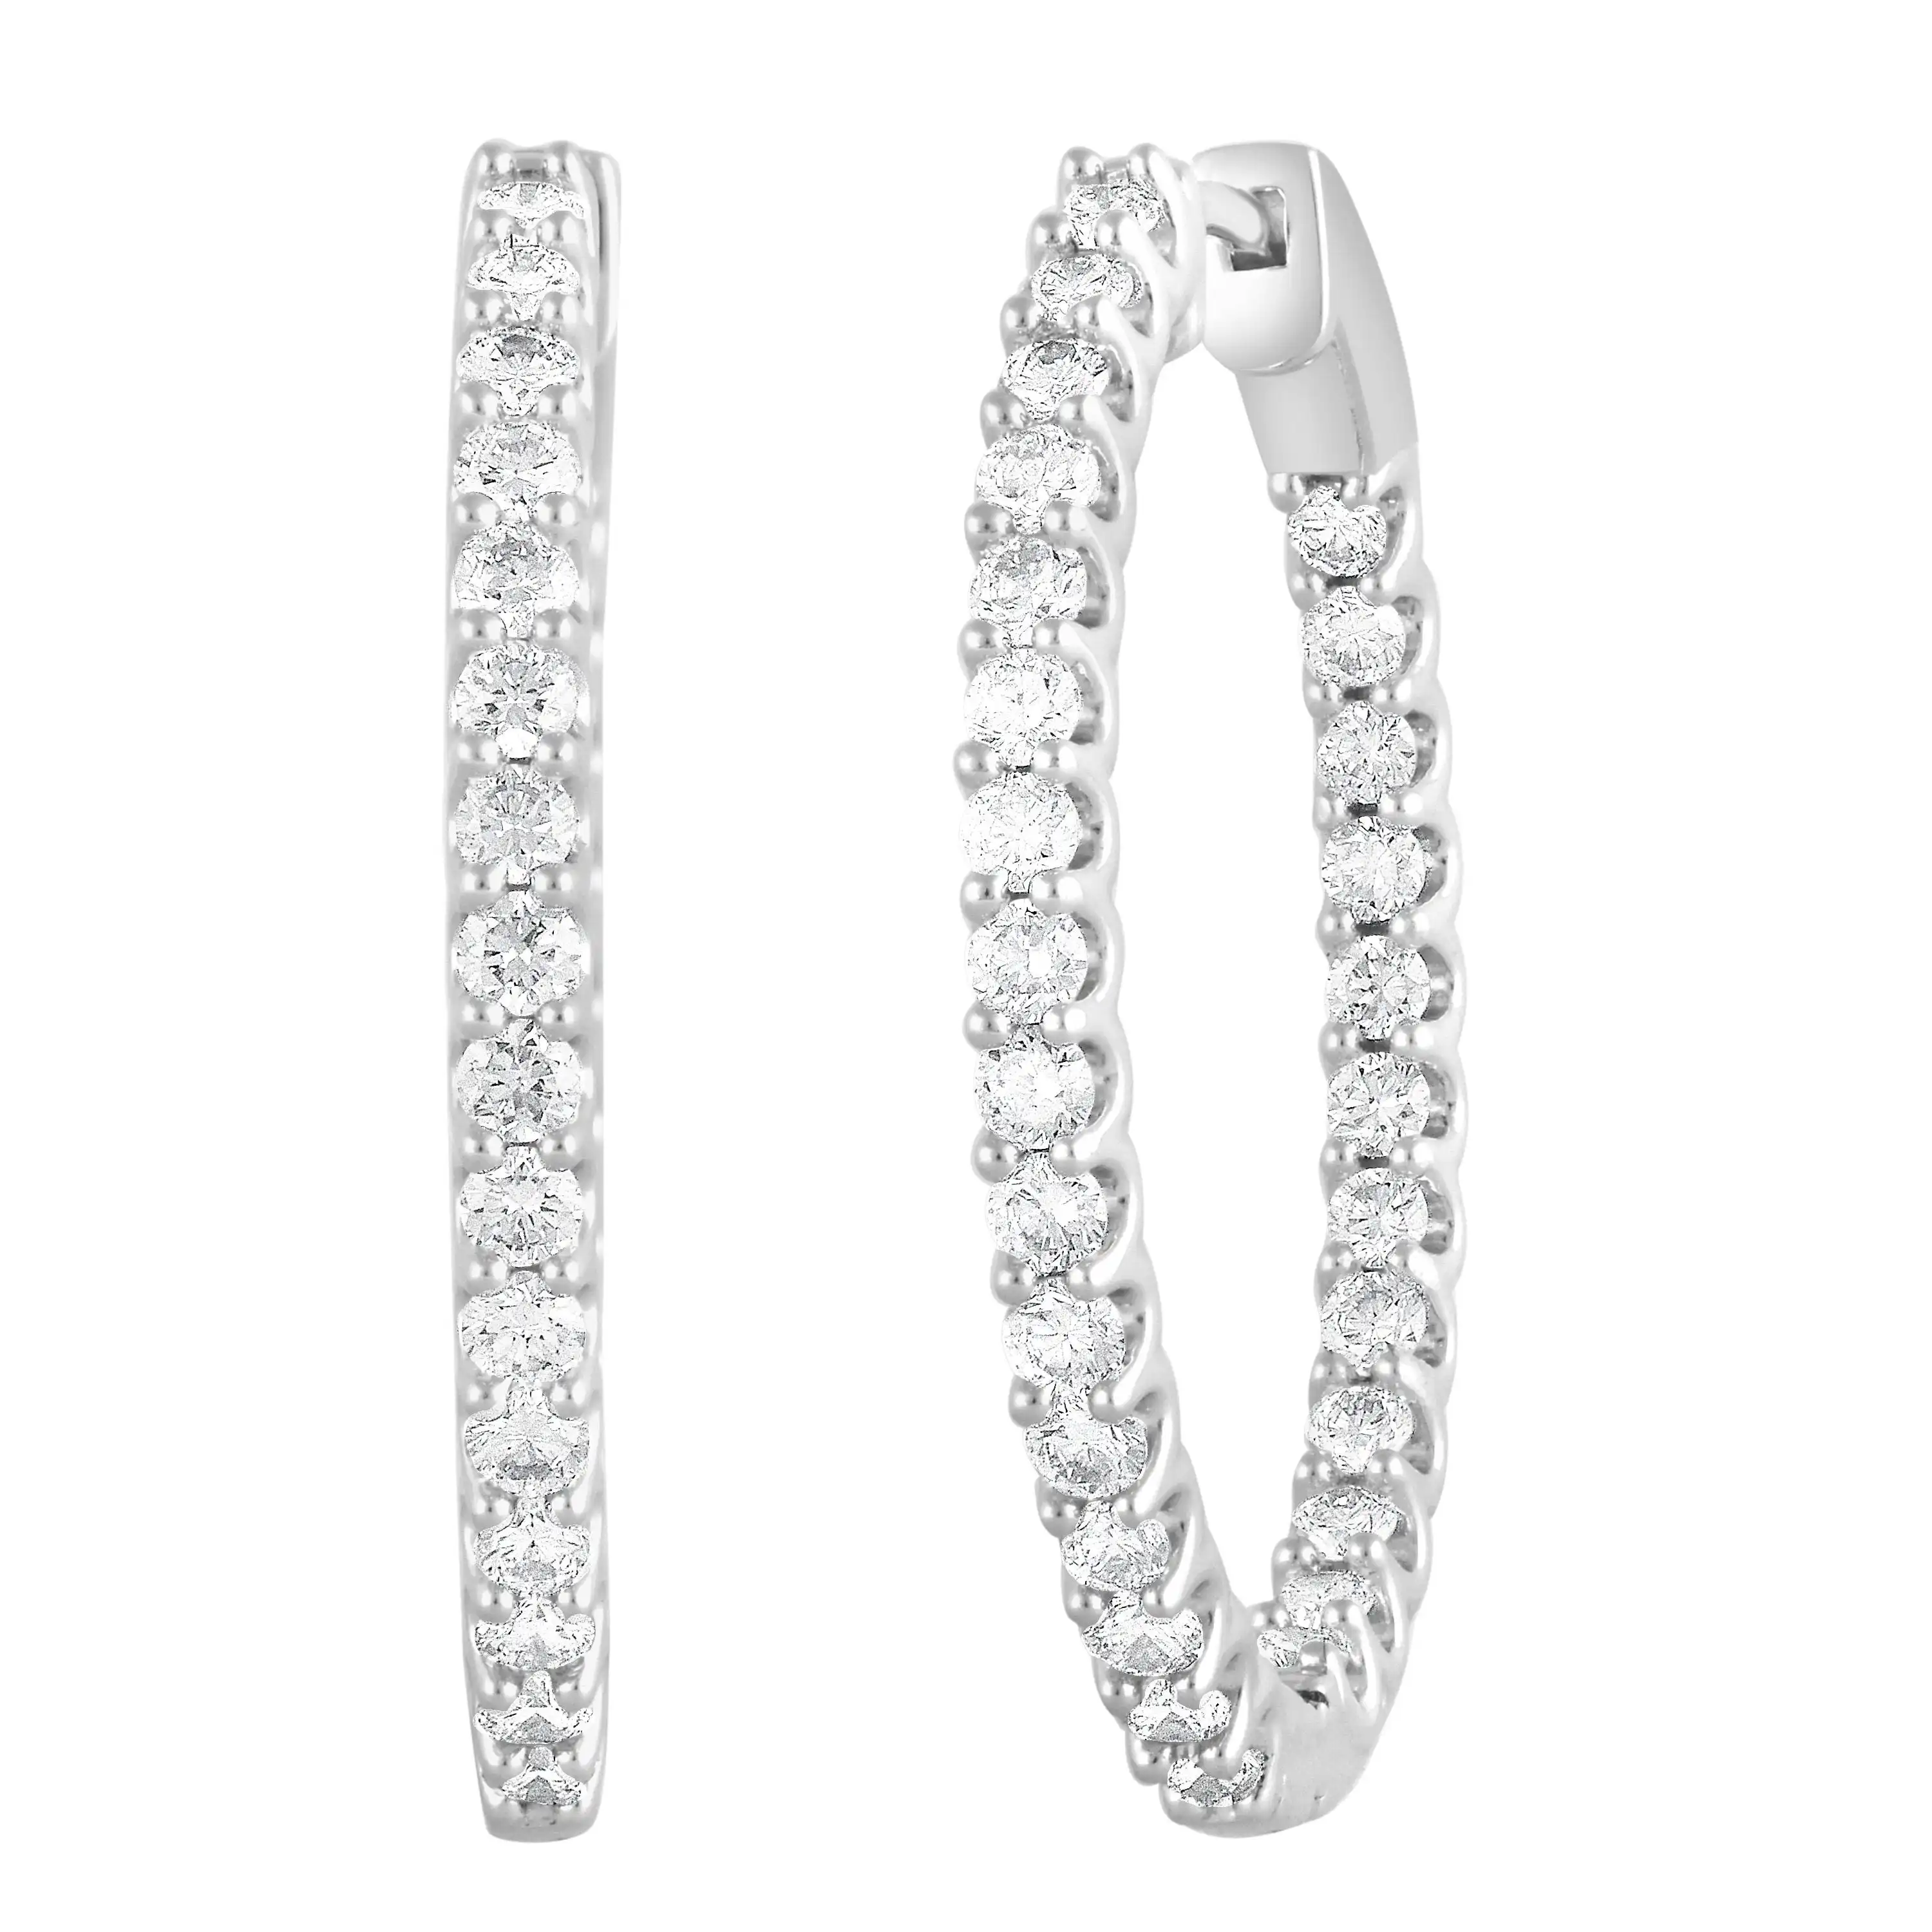 Mirage Hoop Earrings with 2.00ct of Laboratory Grown Diamonds in Sterling Silver and Platinum